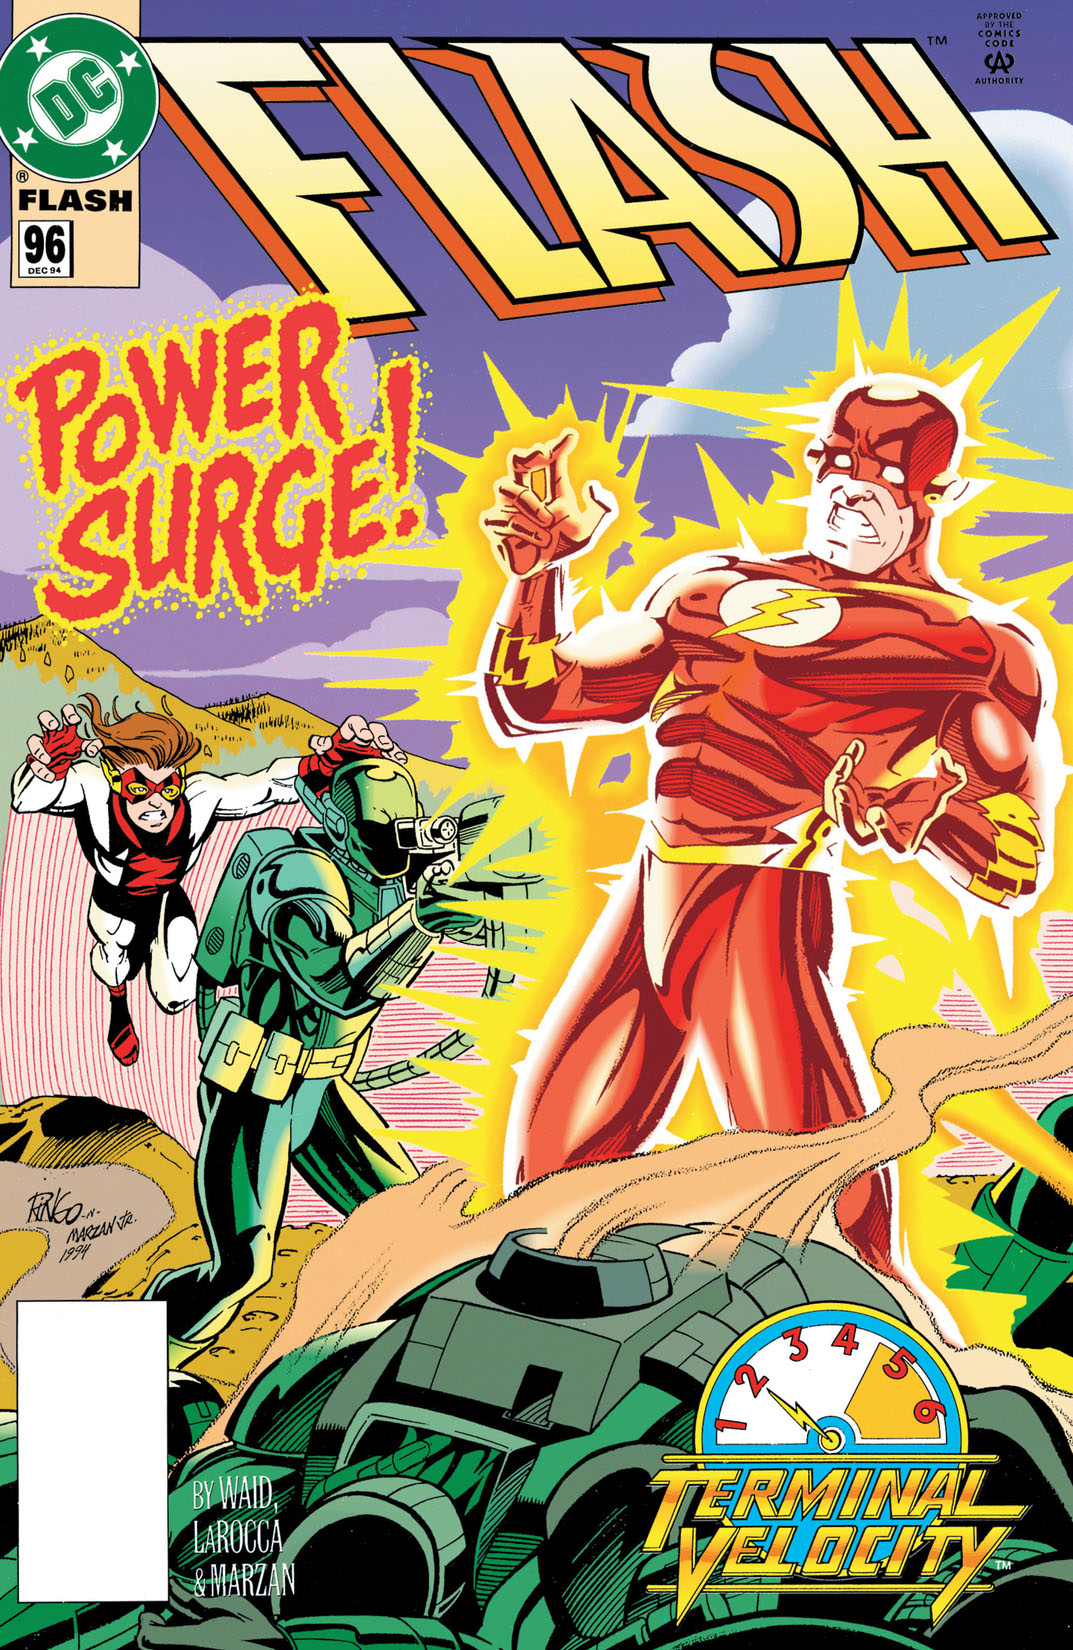 The Flash (1987-) #96 preview images